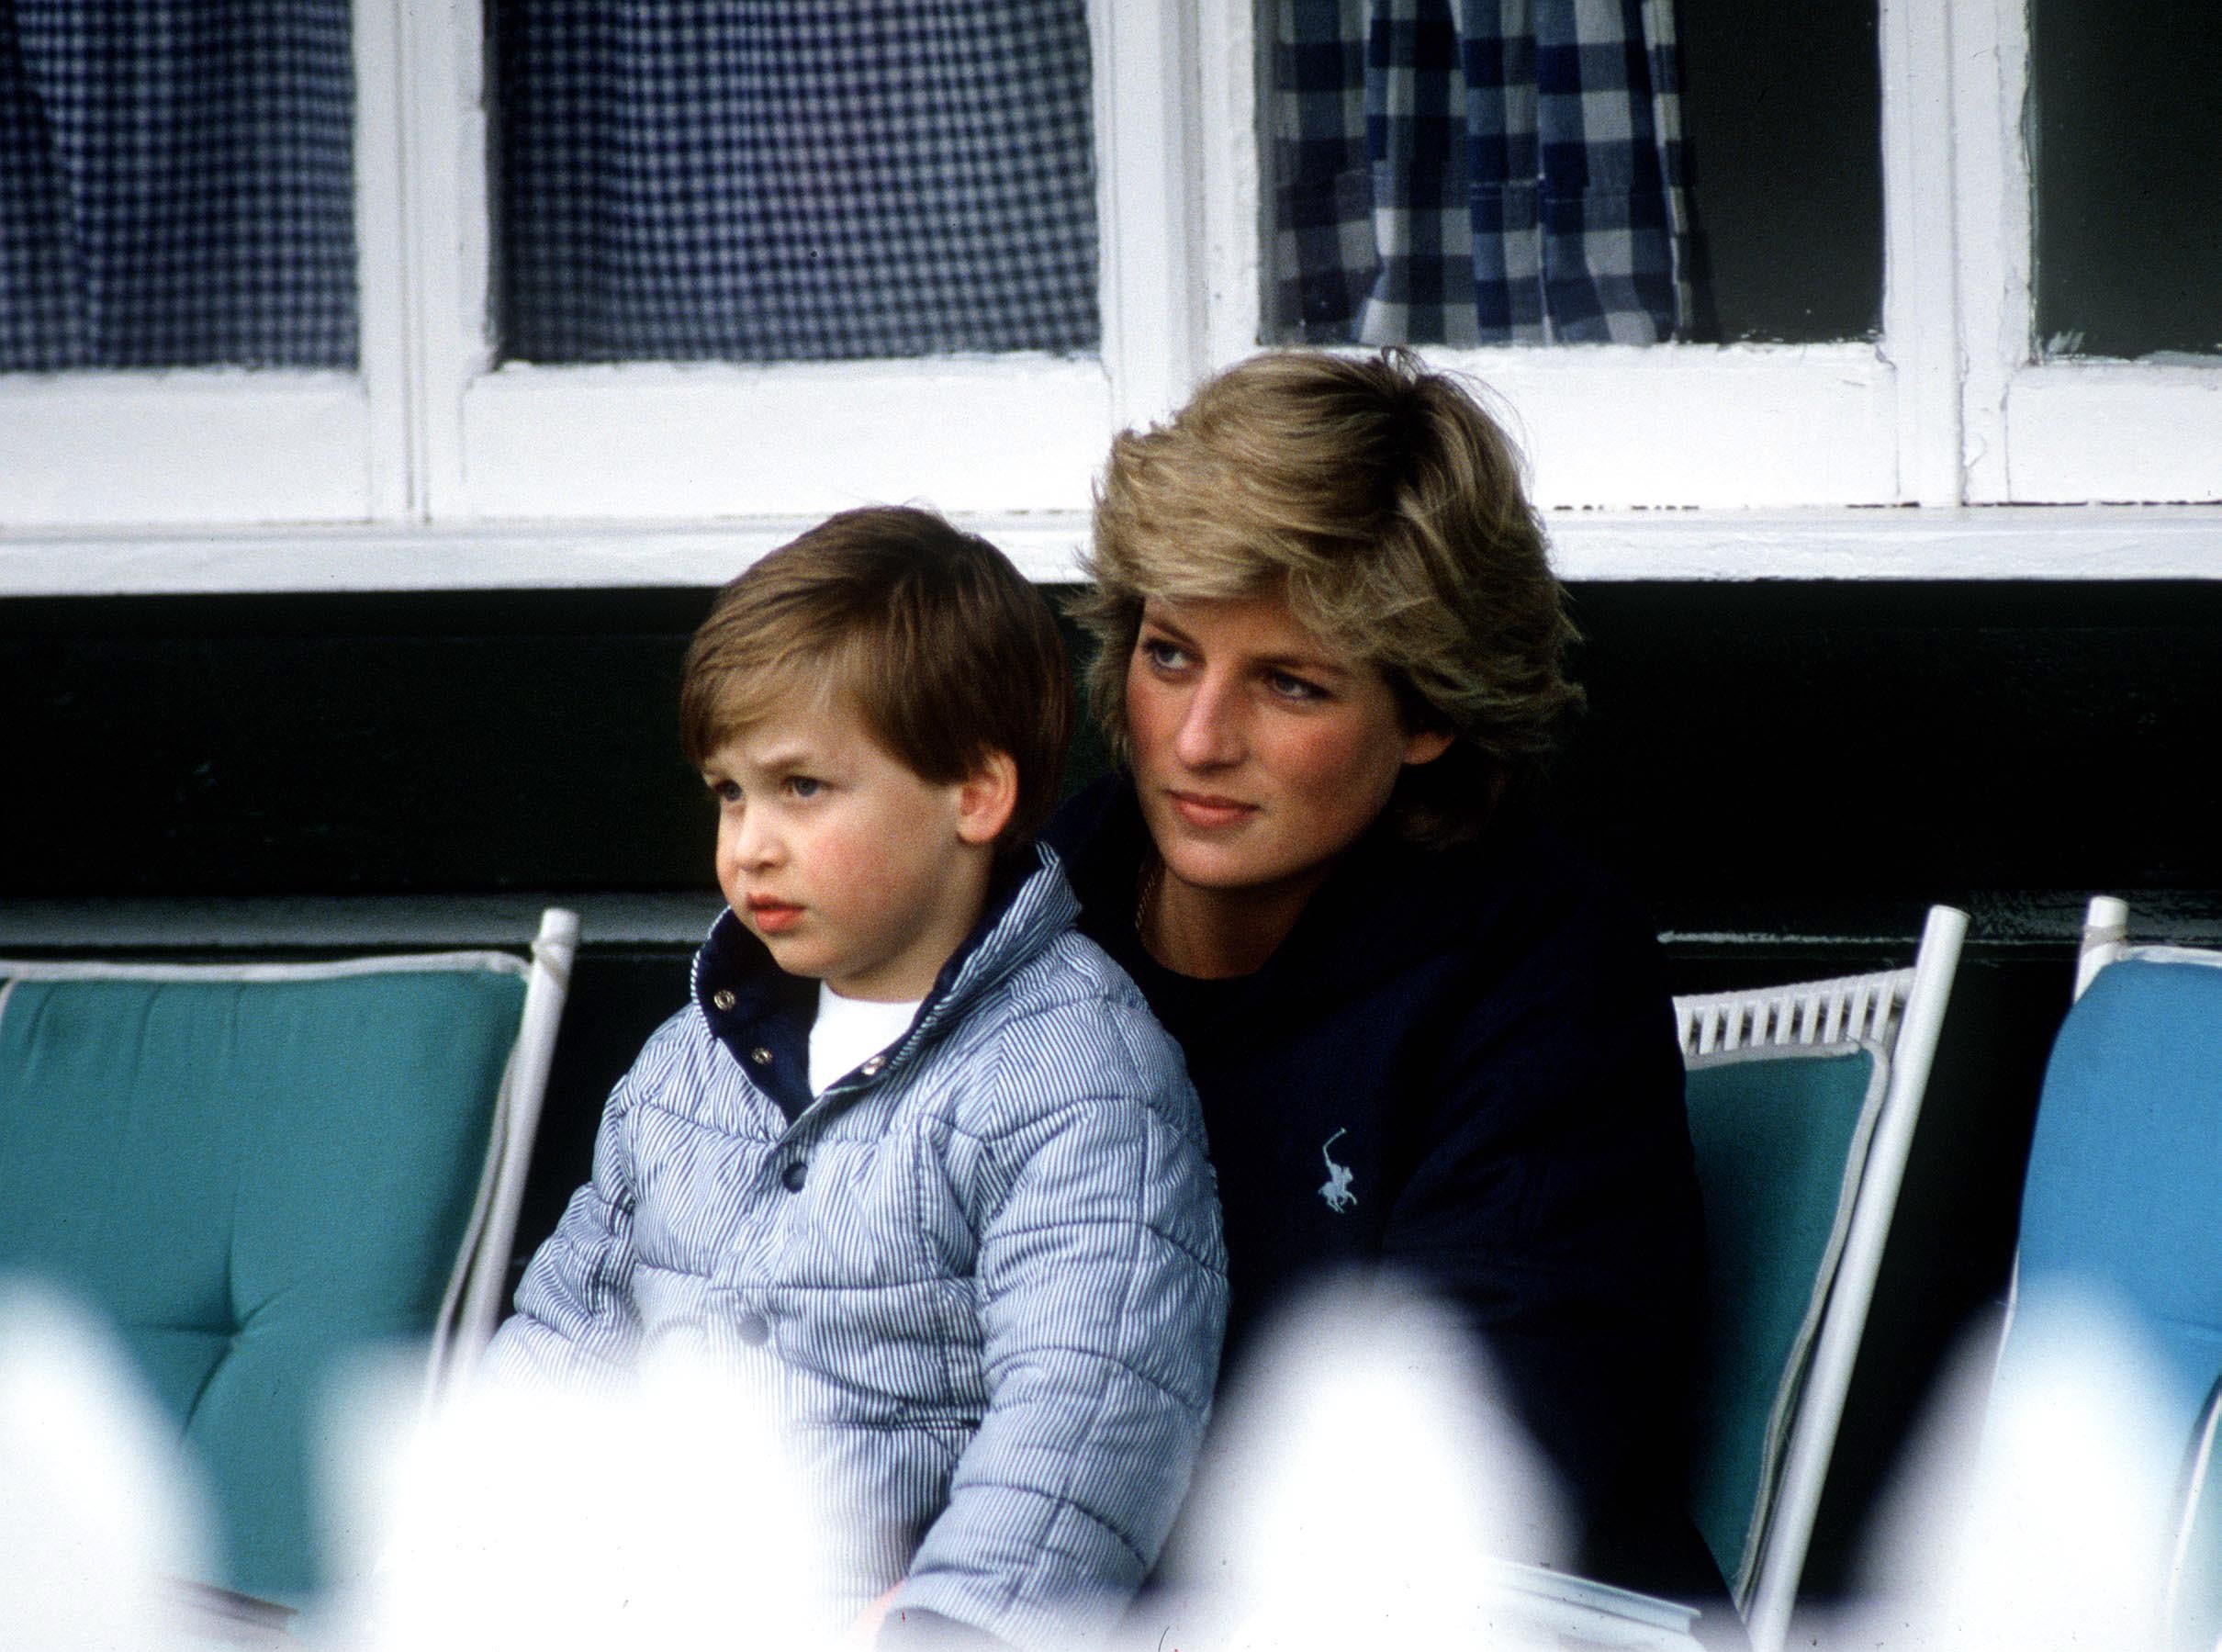 Princess Diana With Prince William Sitting On Her Lap At Polo. | Source: Getty Images